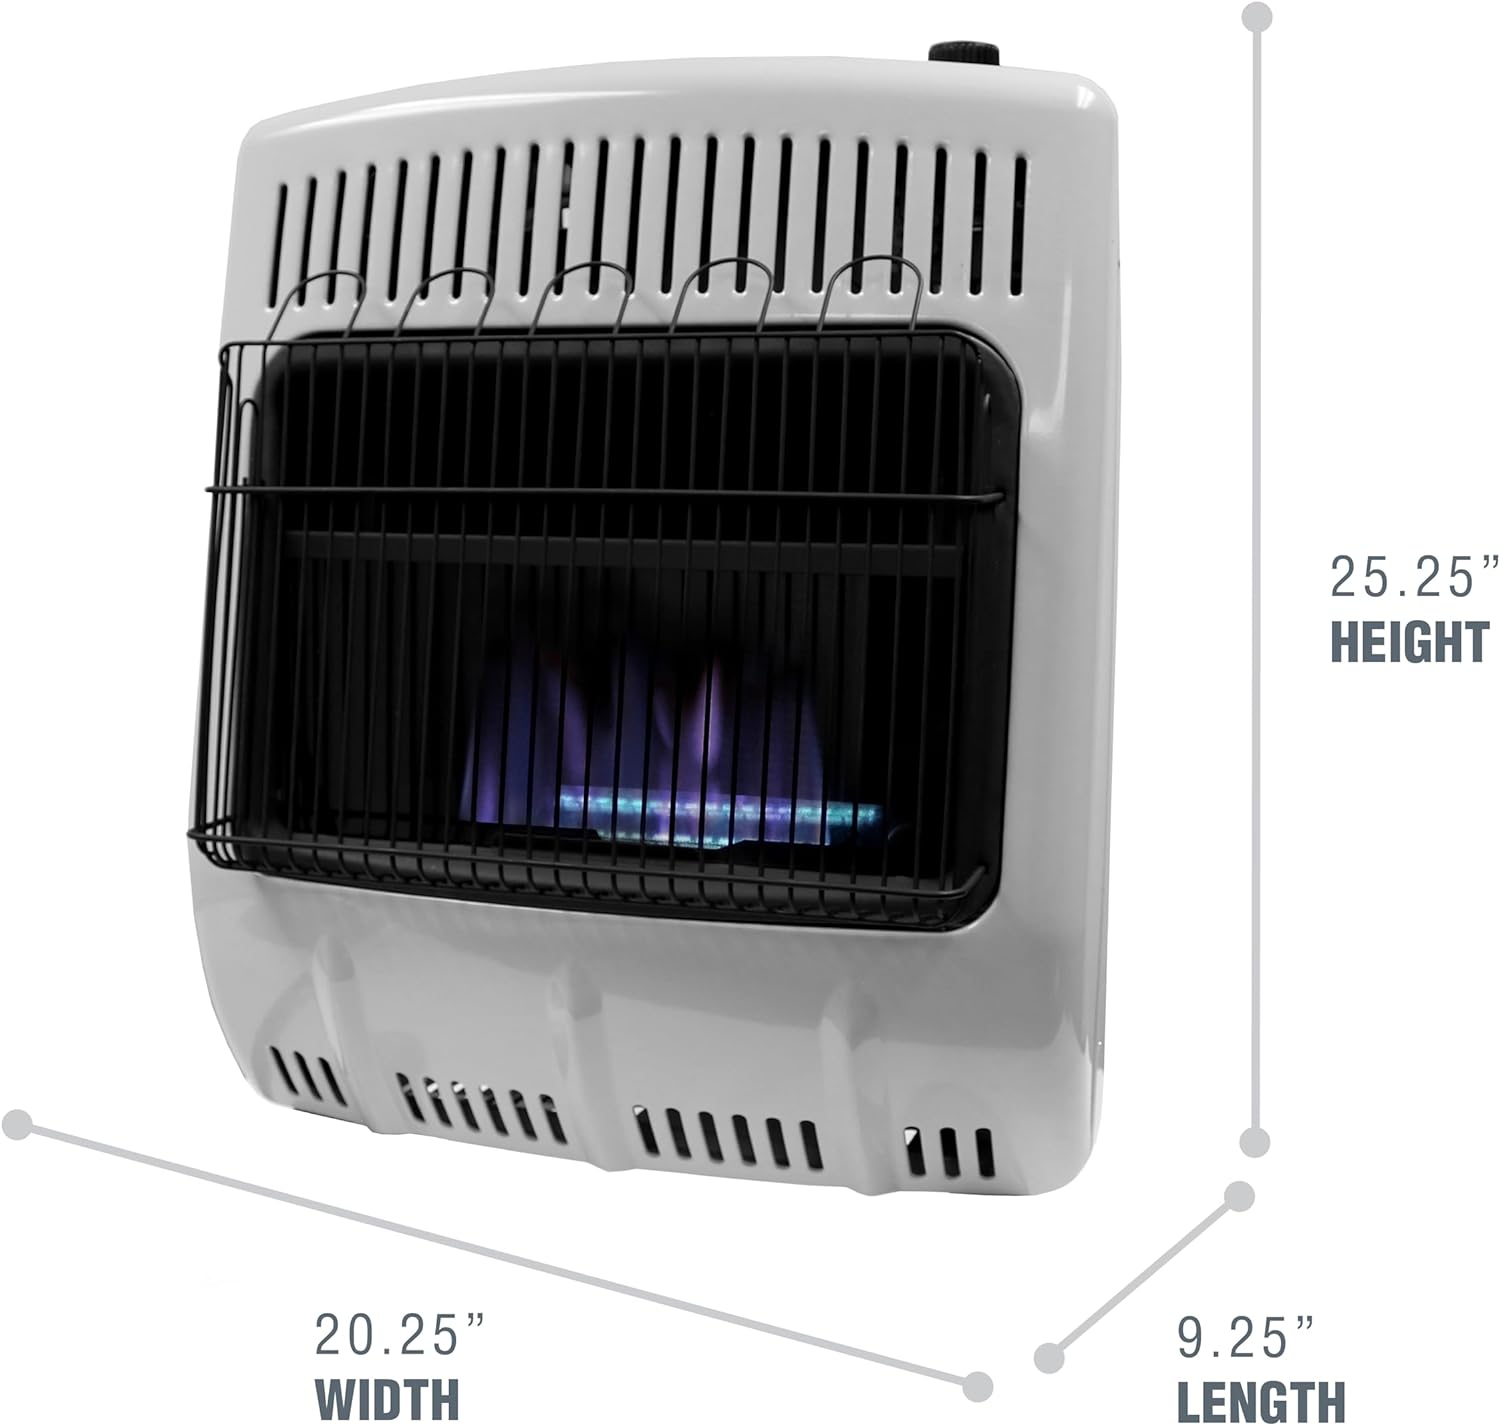 Mr. Heater Vent Free 20,000 British Thermal Unit Radiant Propane Heater with Thermostat and Automatic Low Oxygen Shut Off for Indoor Use, White - Mr. Heater Vent Free Propane Heater Review